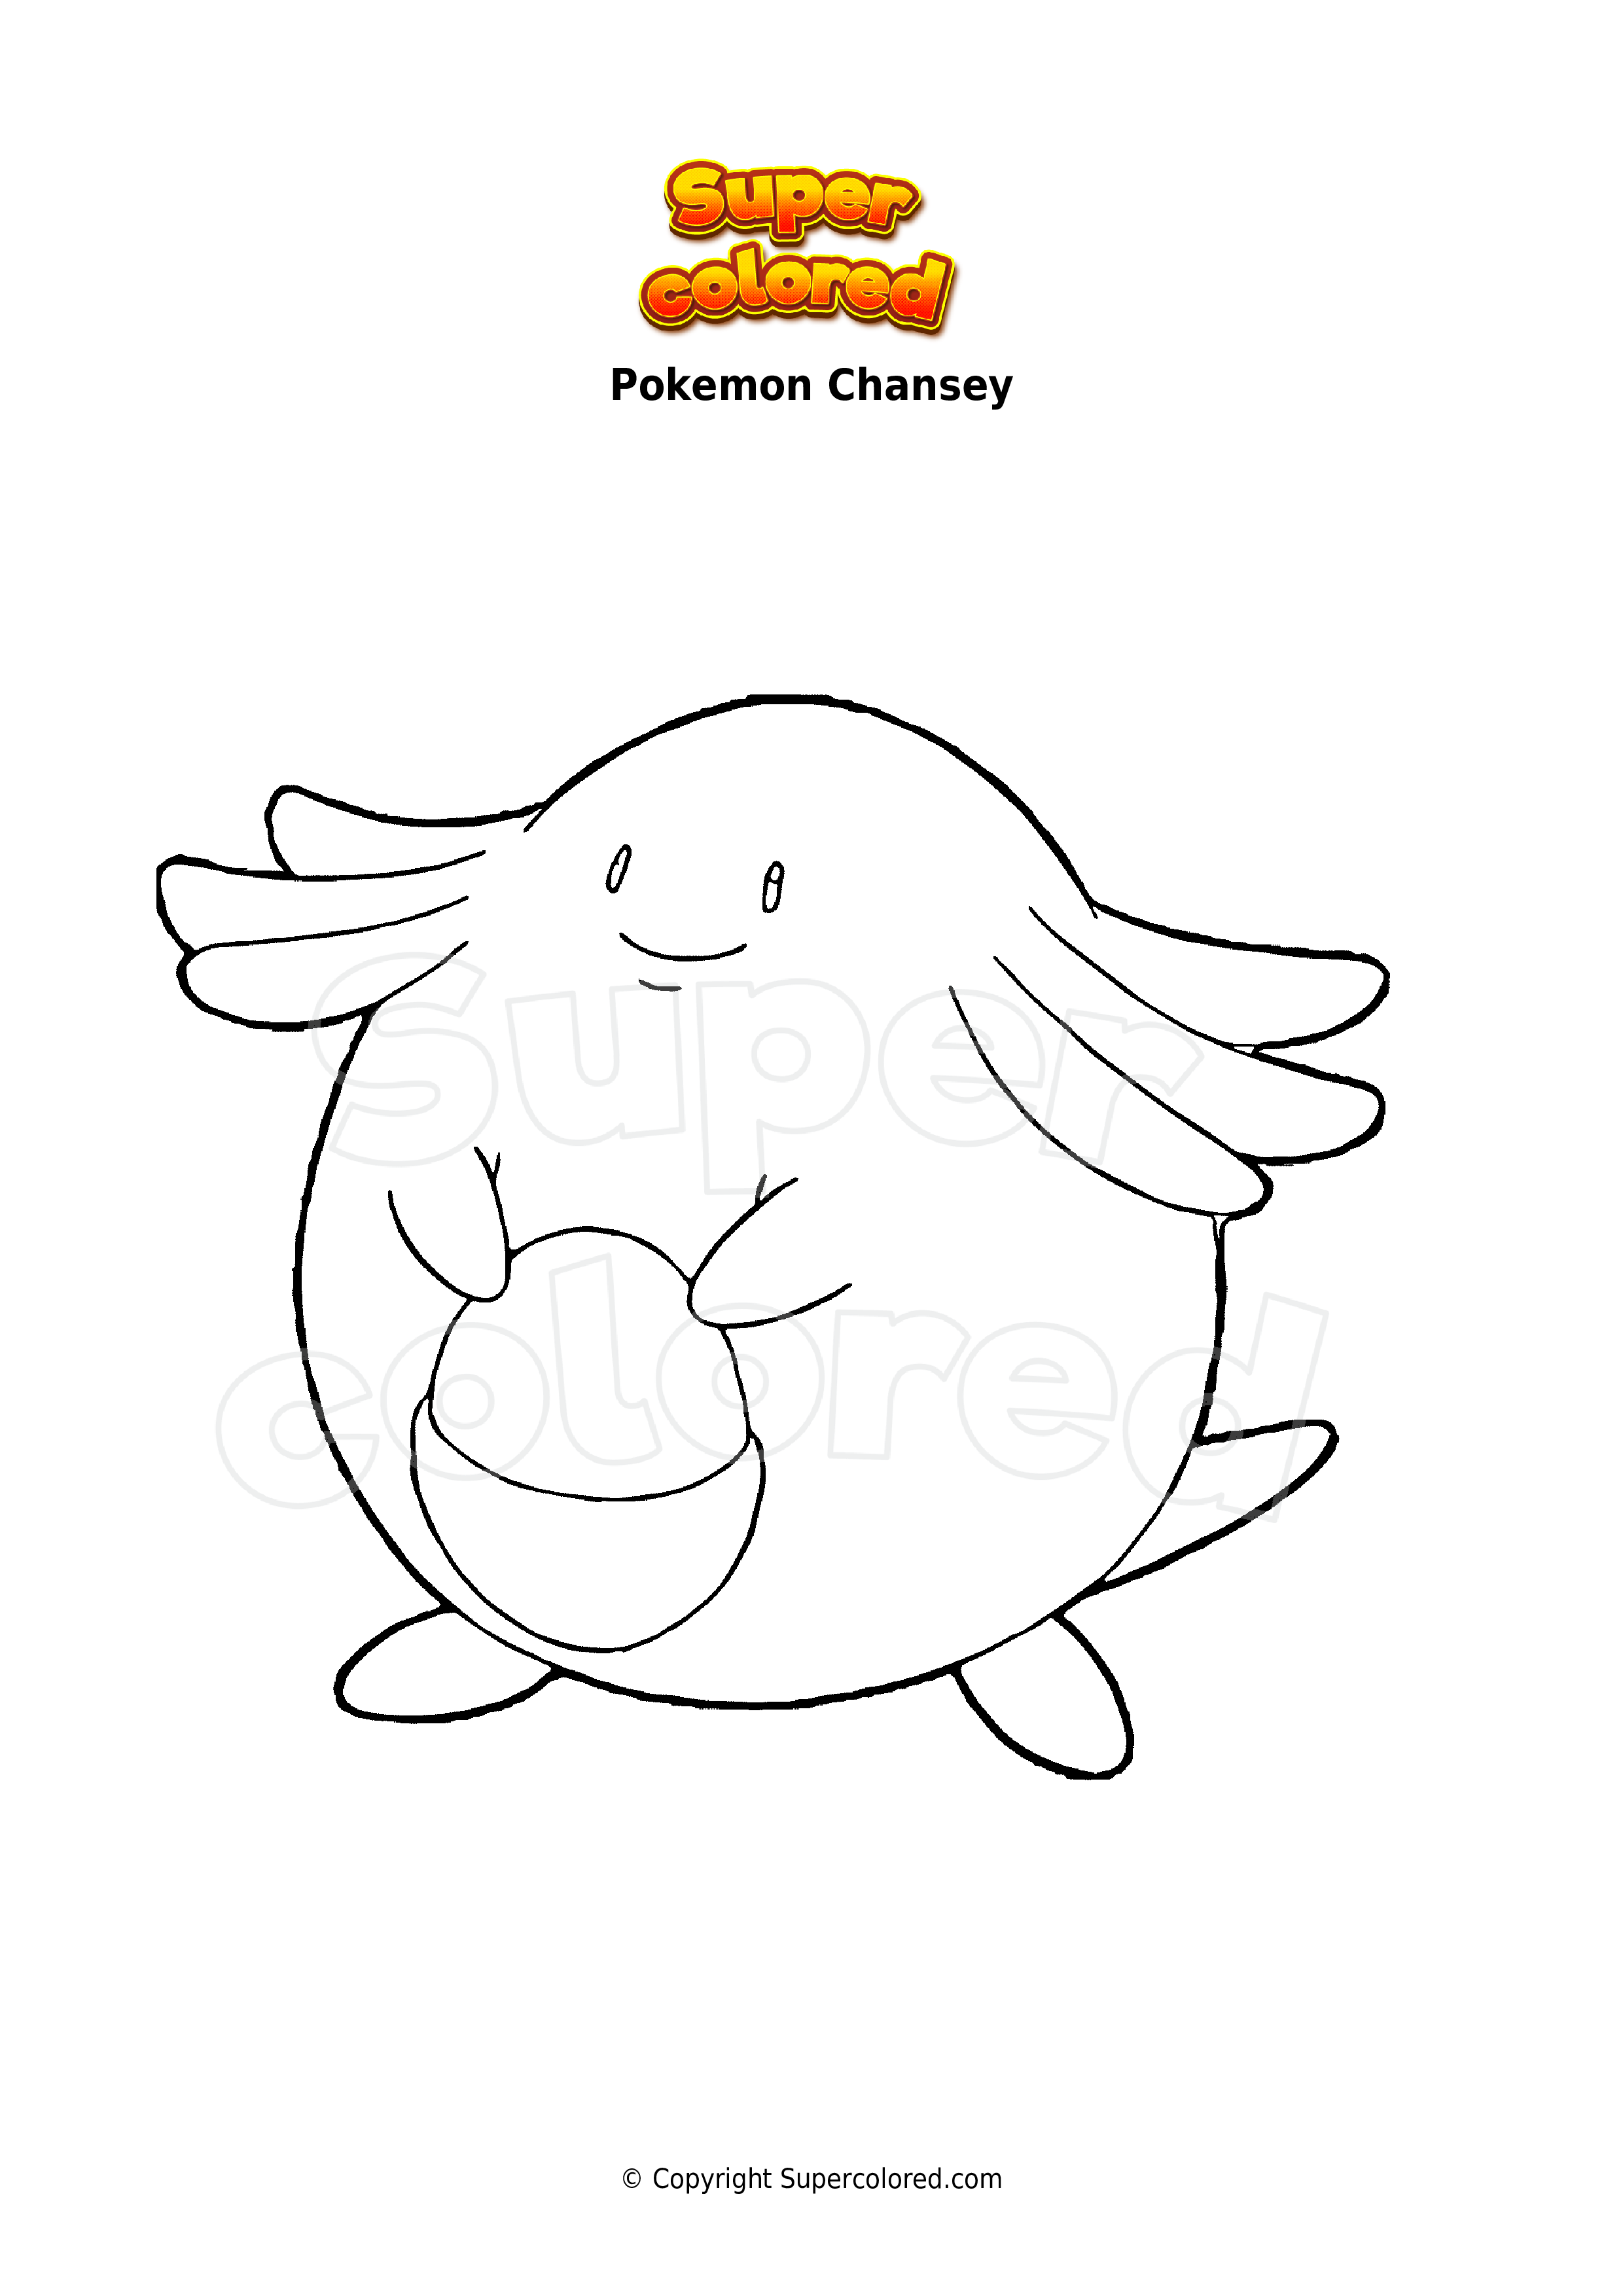 Coloring Page Pokemon Chansey